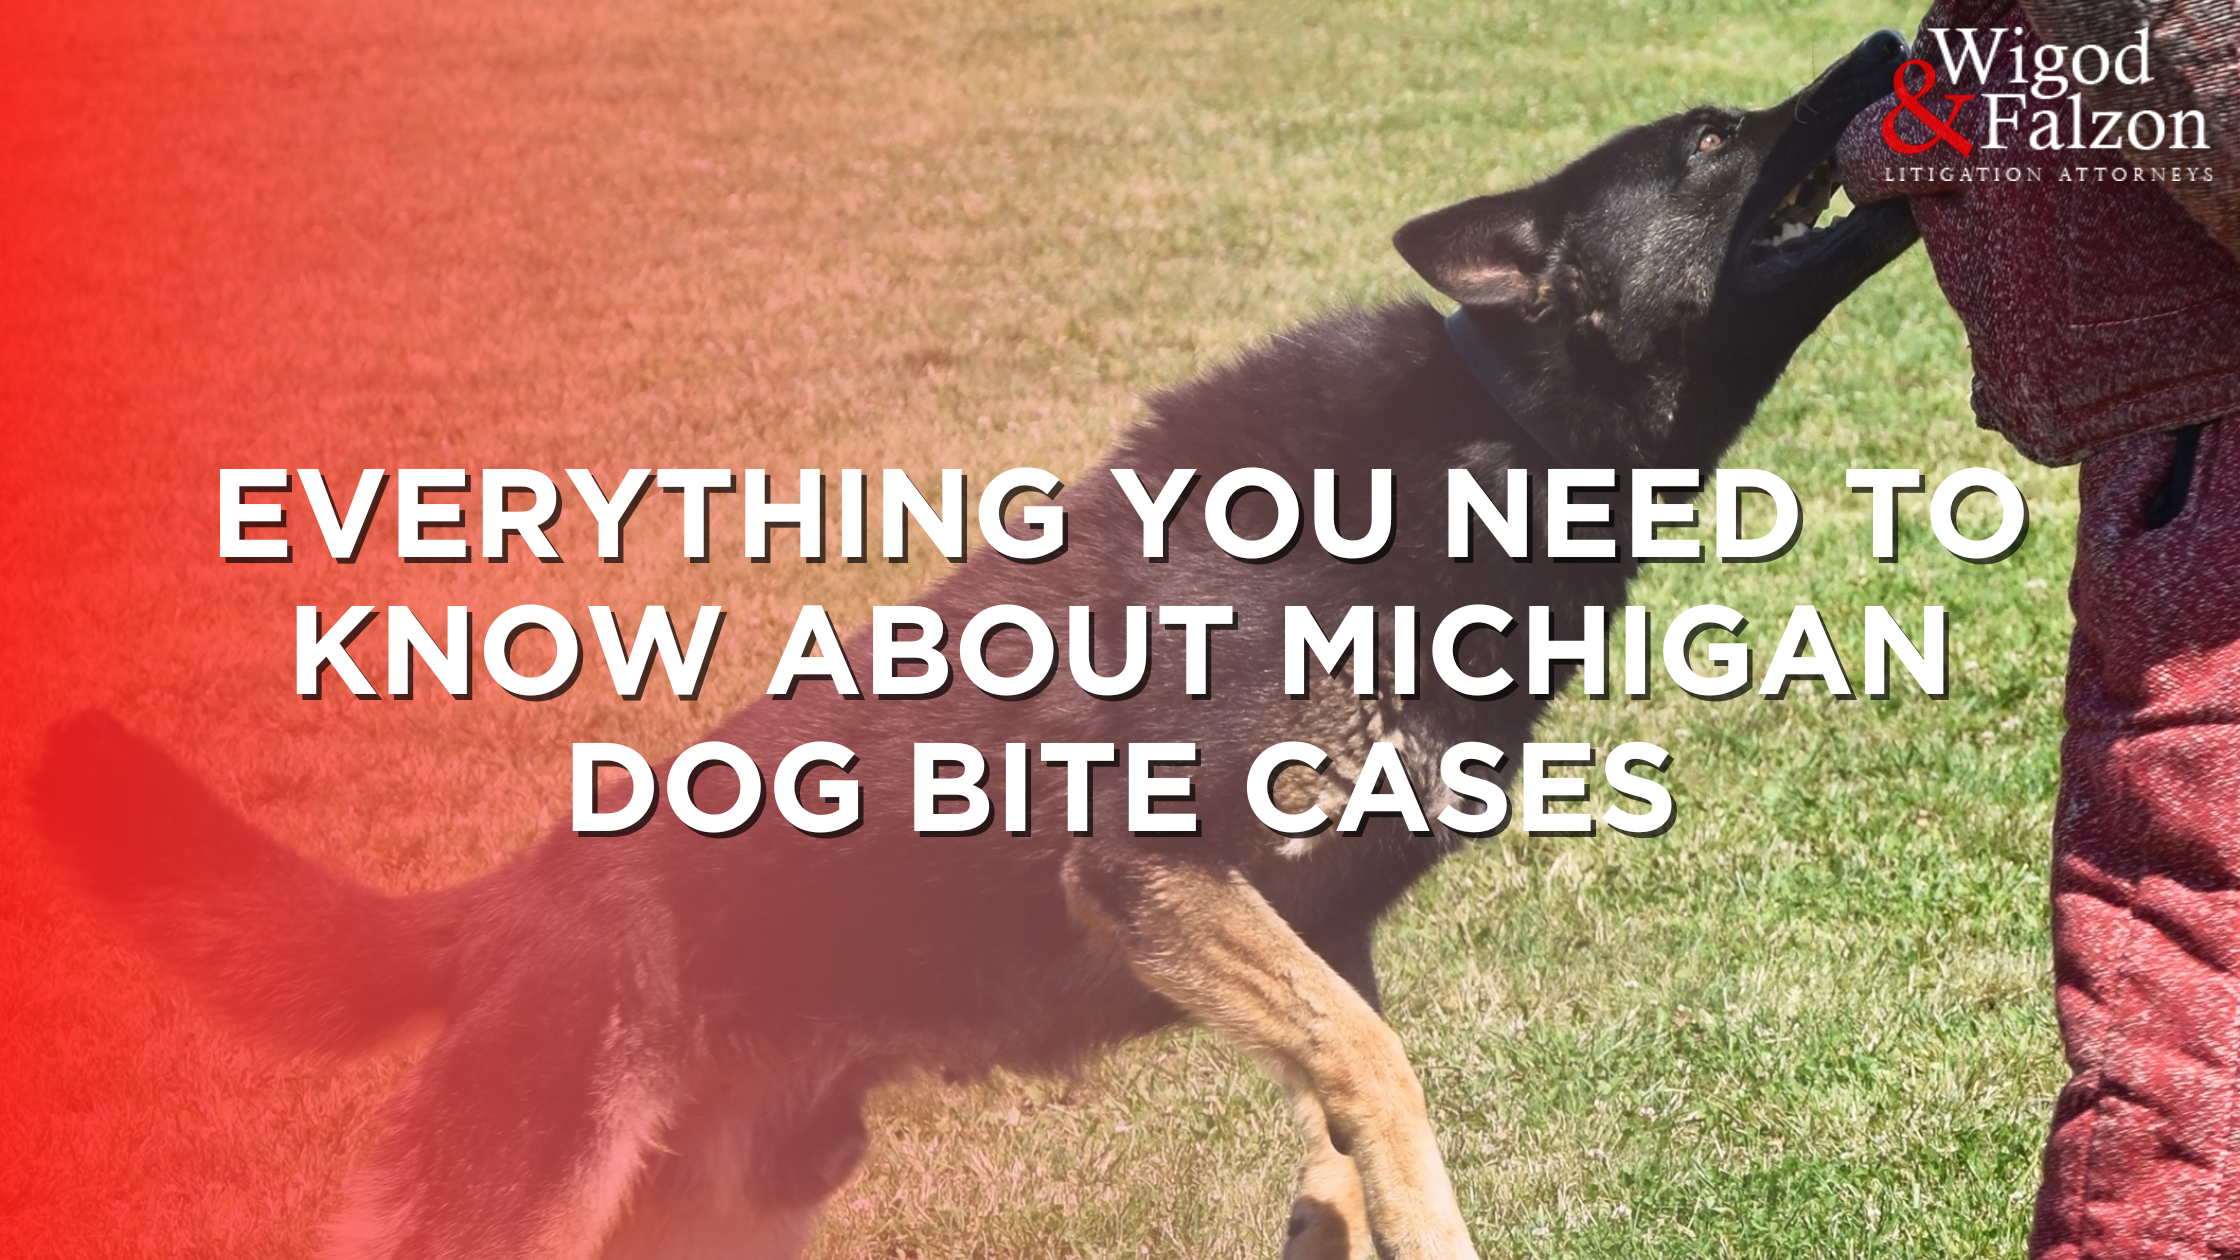 Everything You Need to Know About Michigan Dog Bite Laws